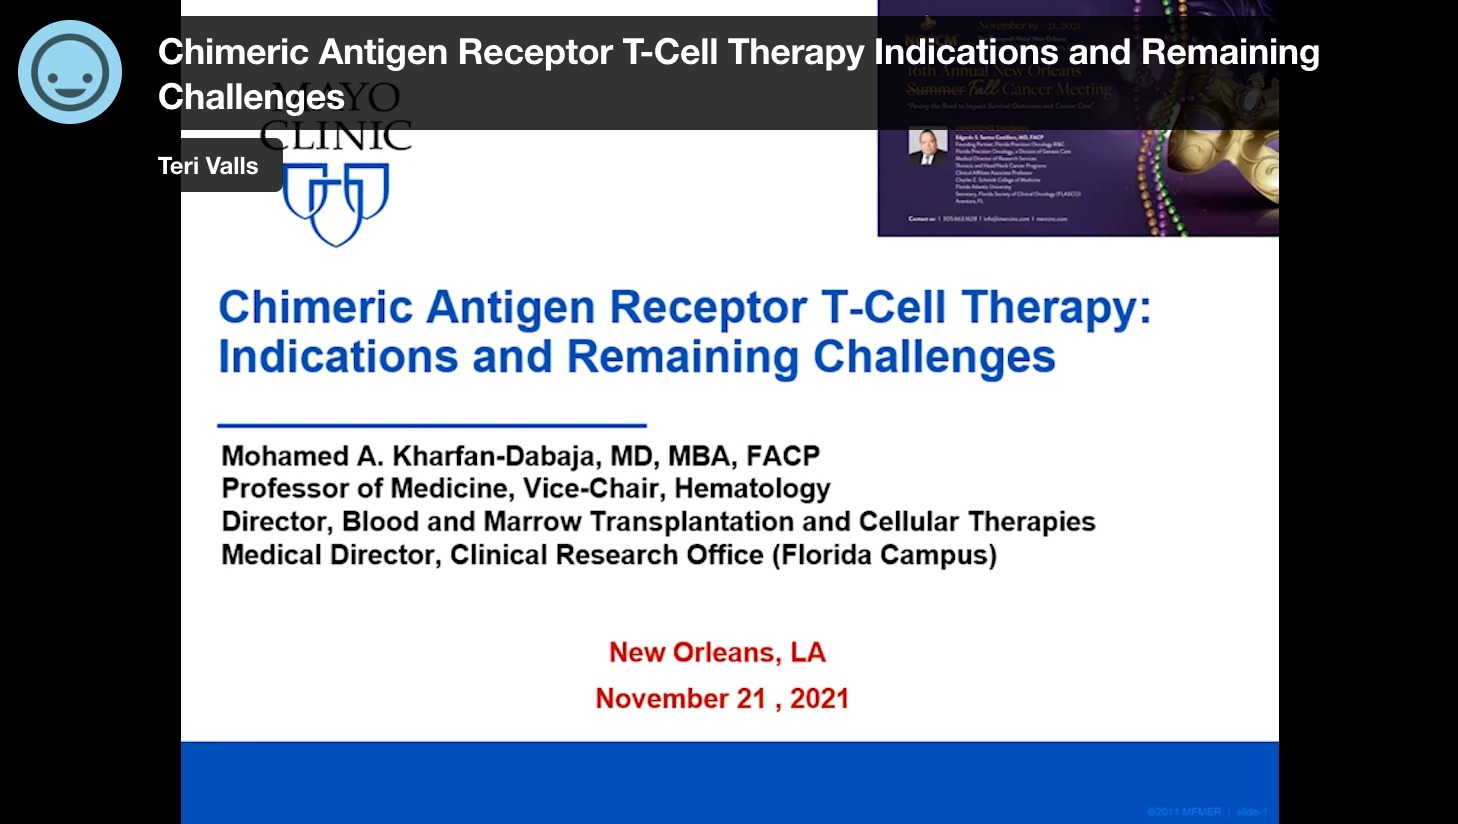 Chimeric Antigen Receptor T-Cell Therapy: Indications and Remaining Challenges